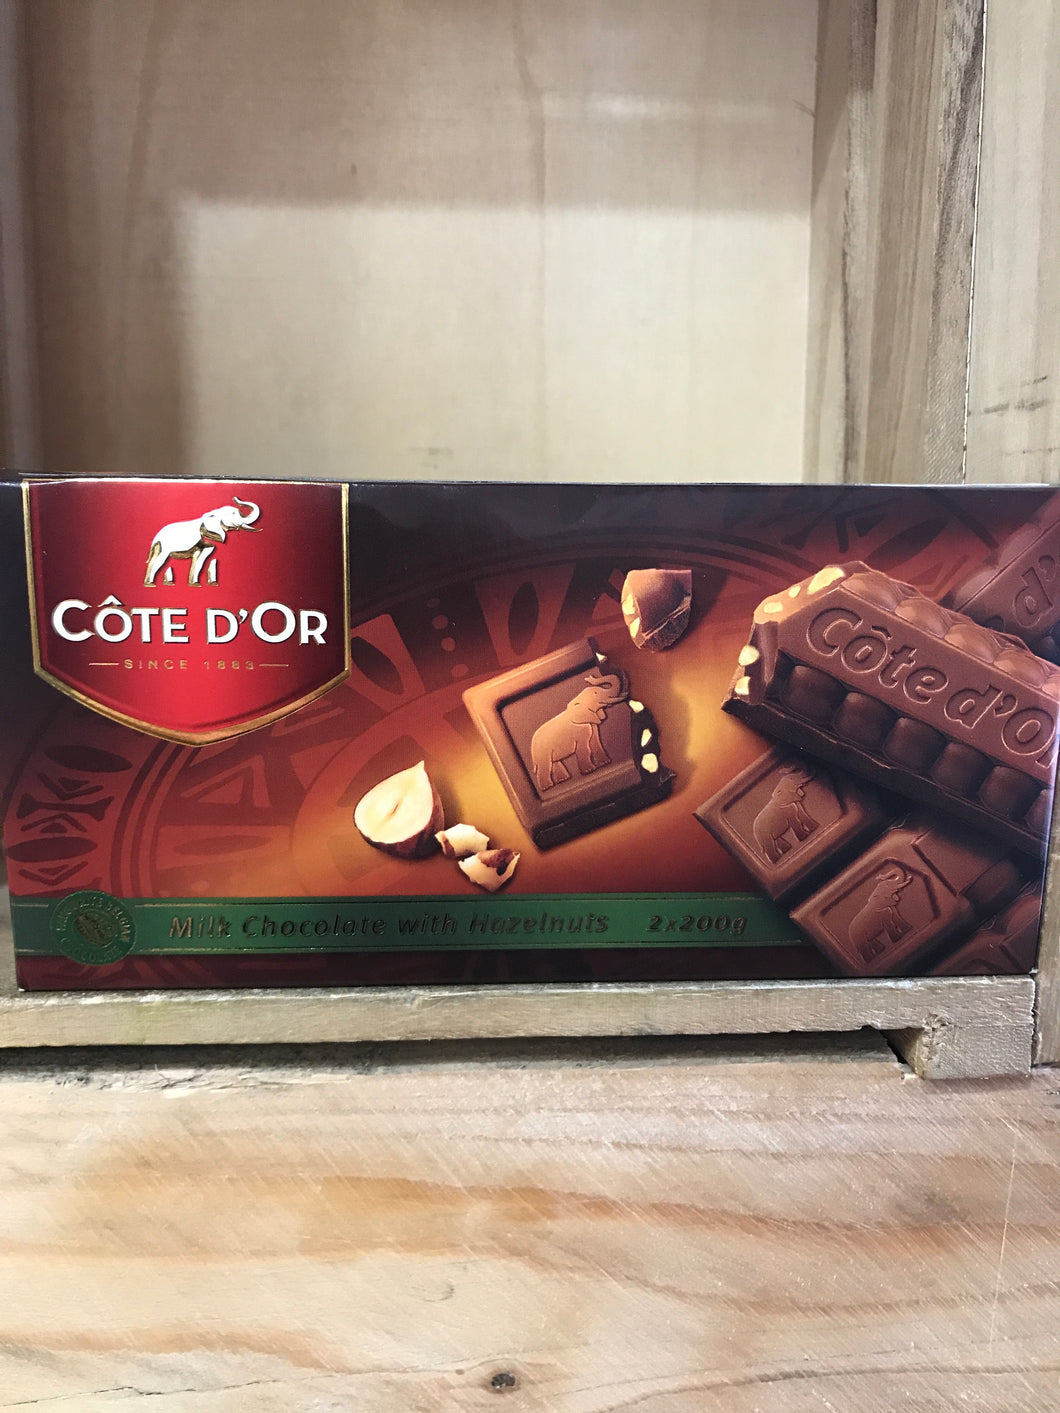 2x Cote D'Or Milk Chocolate with Hazelnuts 200g